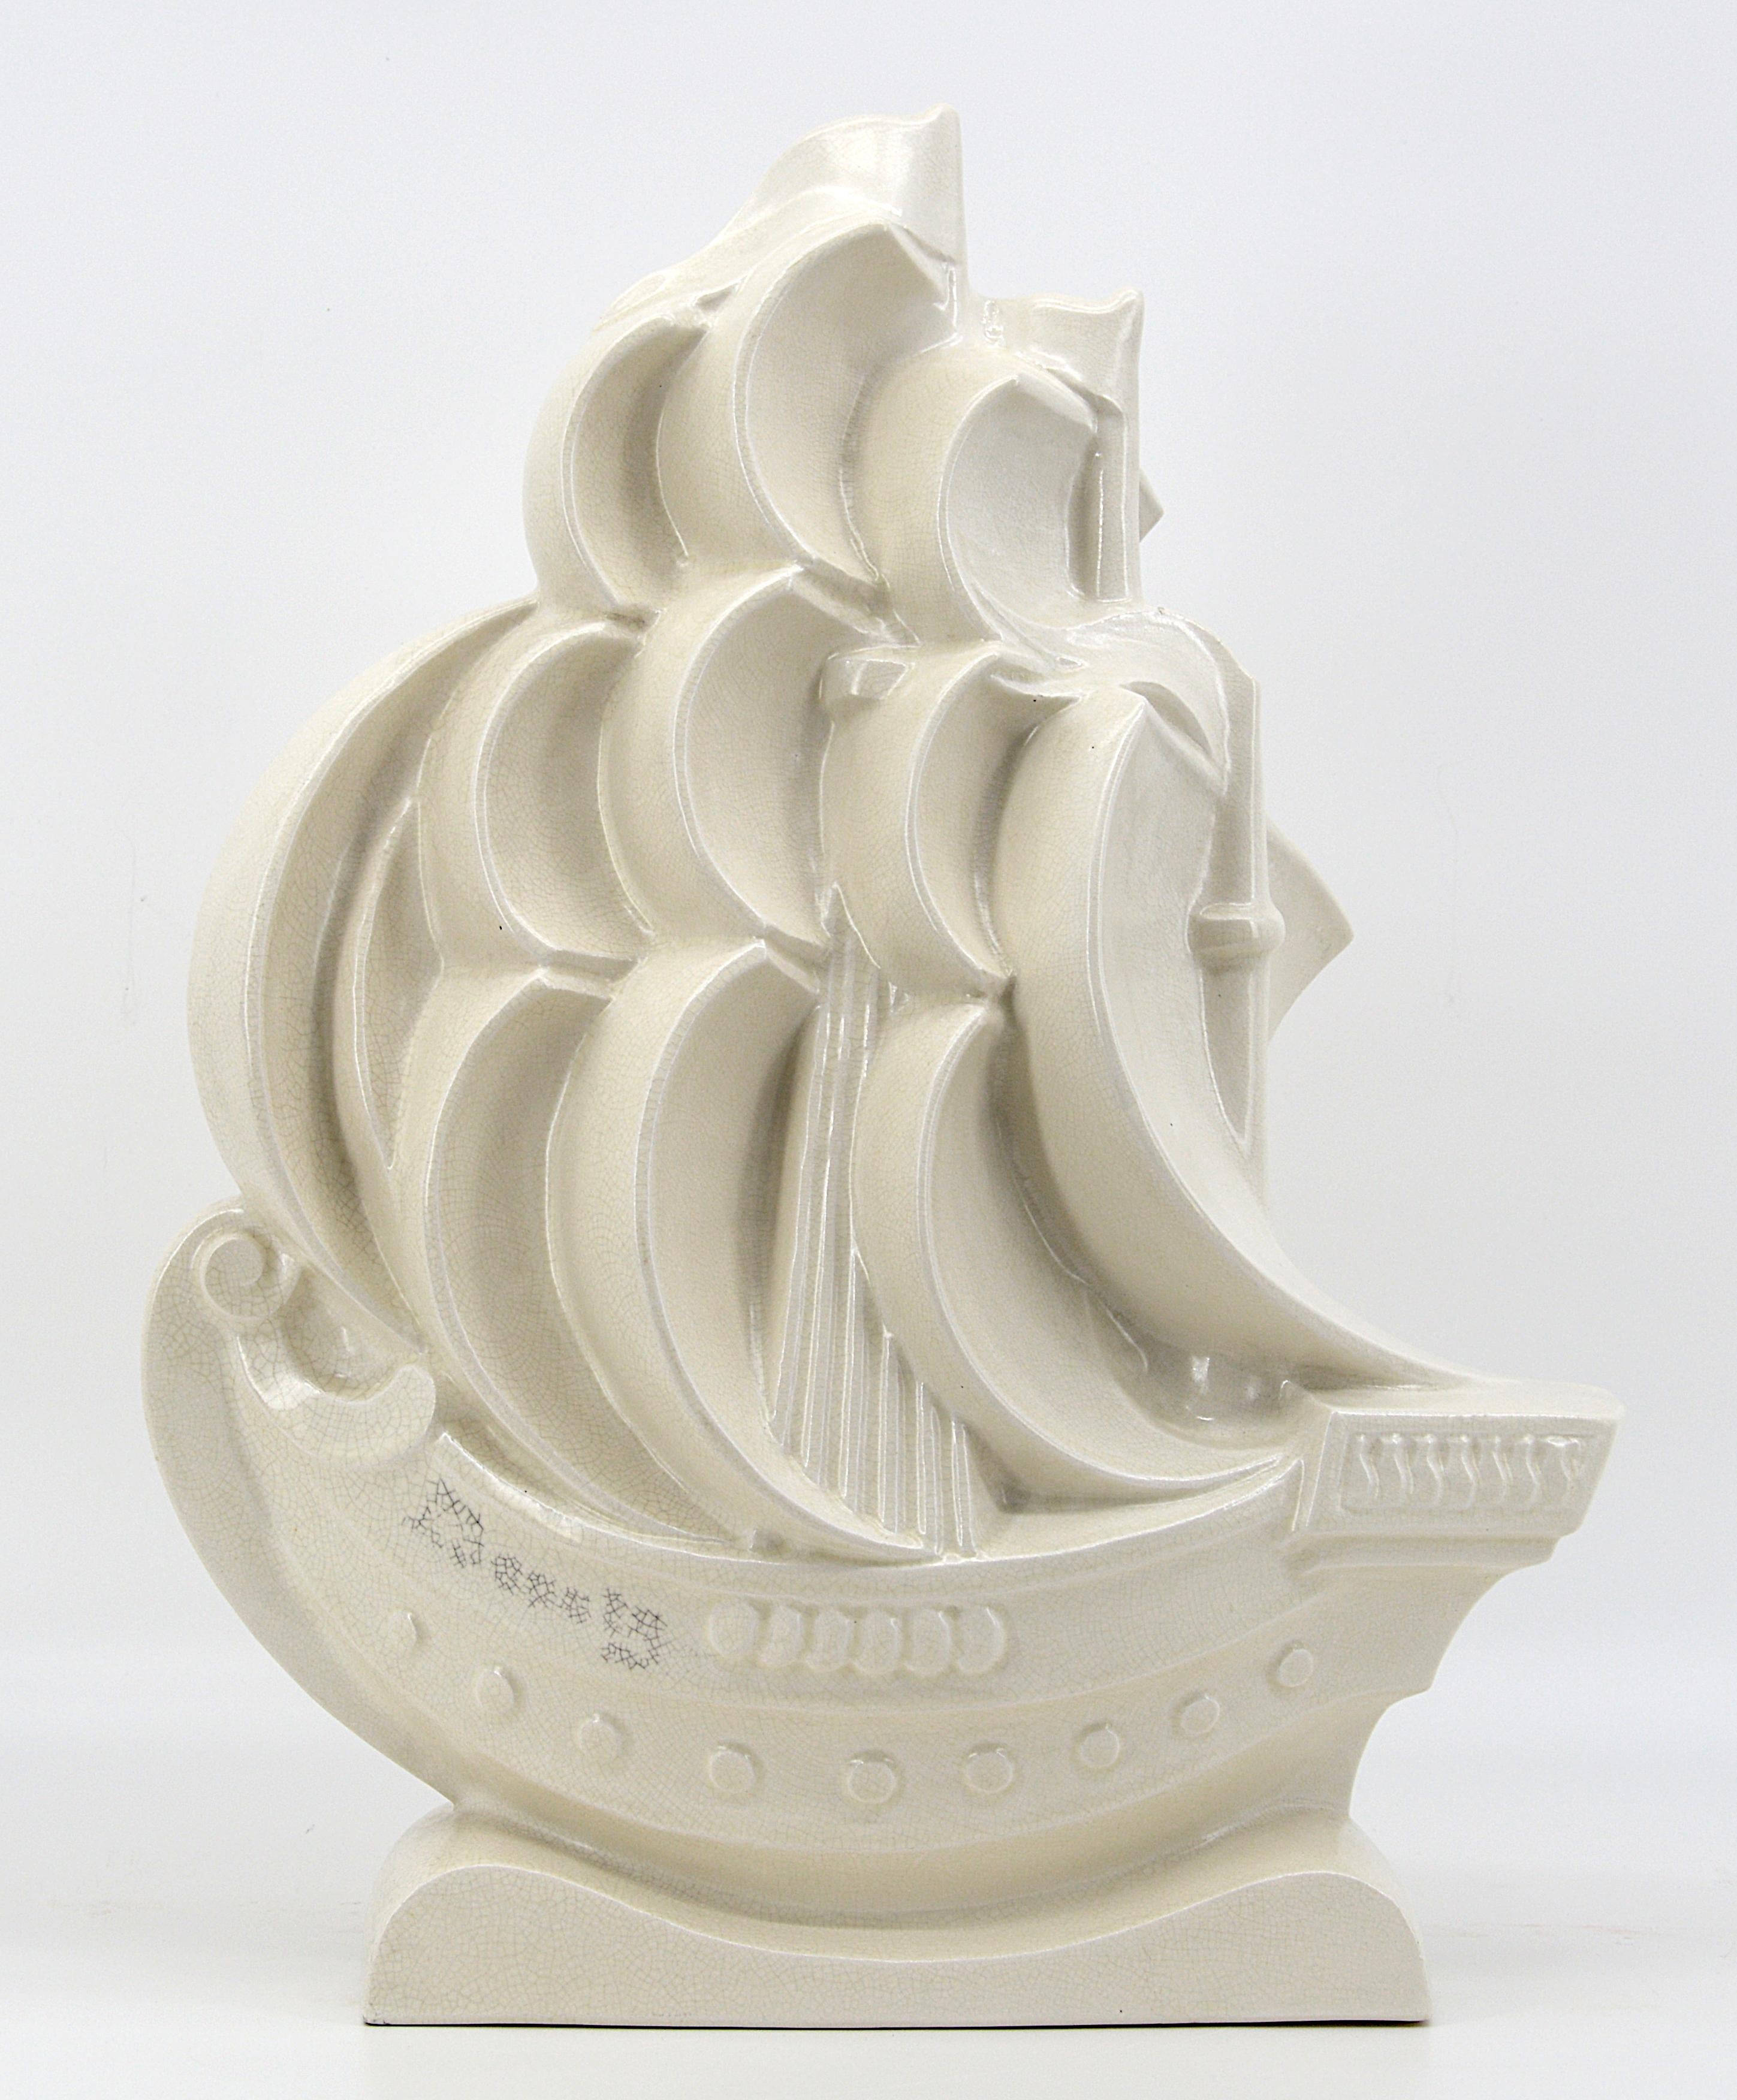 Early 20th Century Lejan French Art Deco Crackle Glaze Ceramic Ship Sculpture at Orchies's, 1930 For Sale